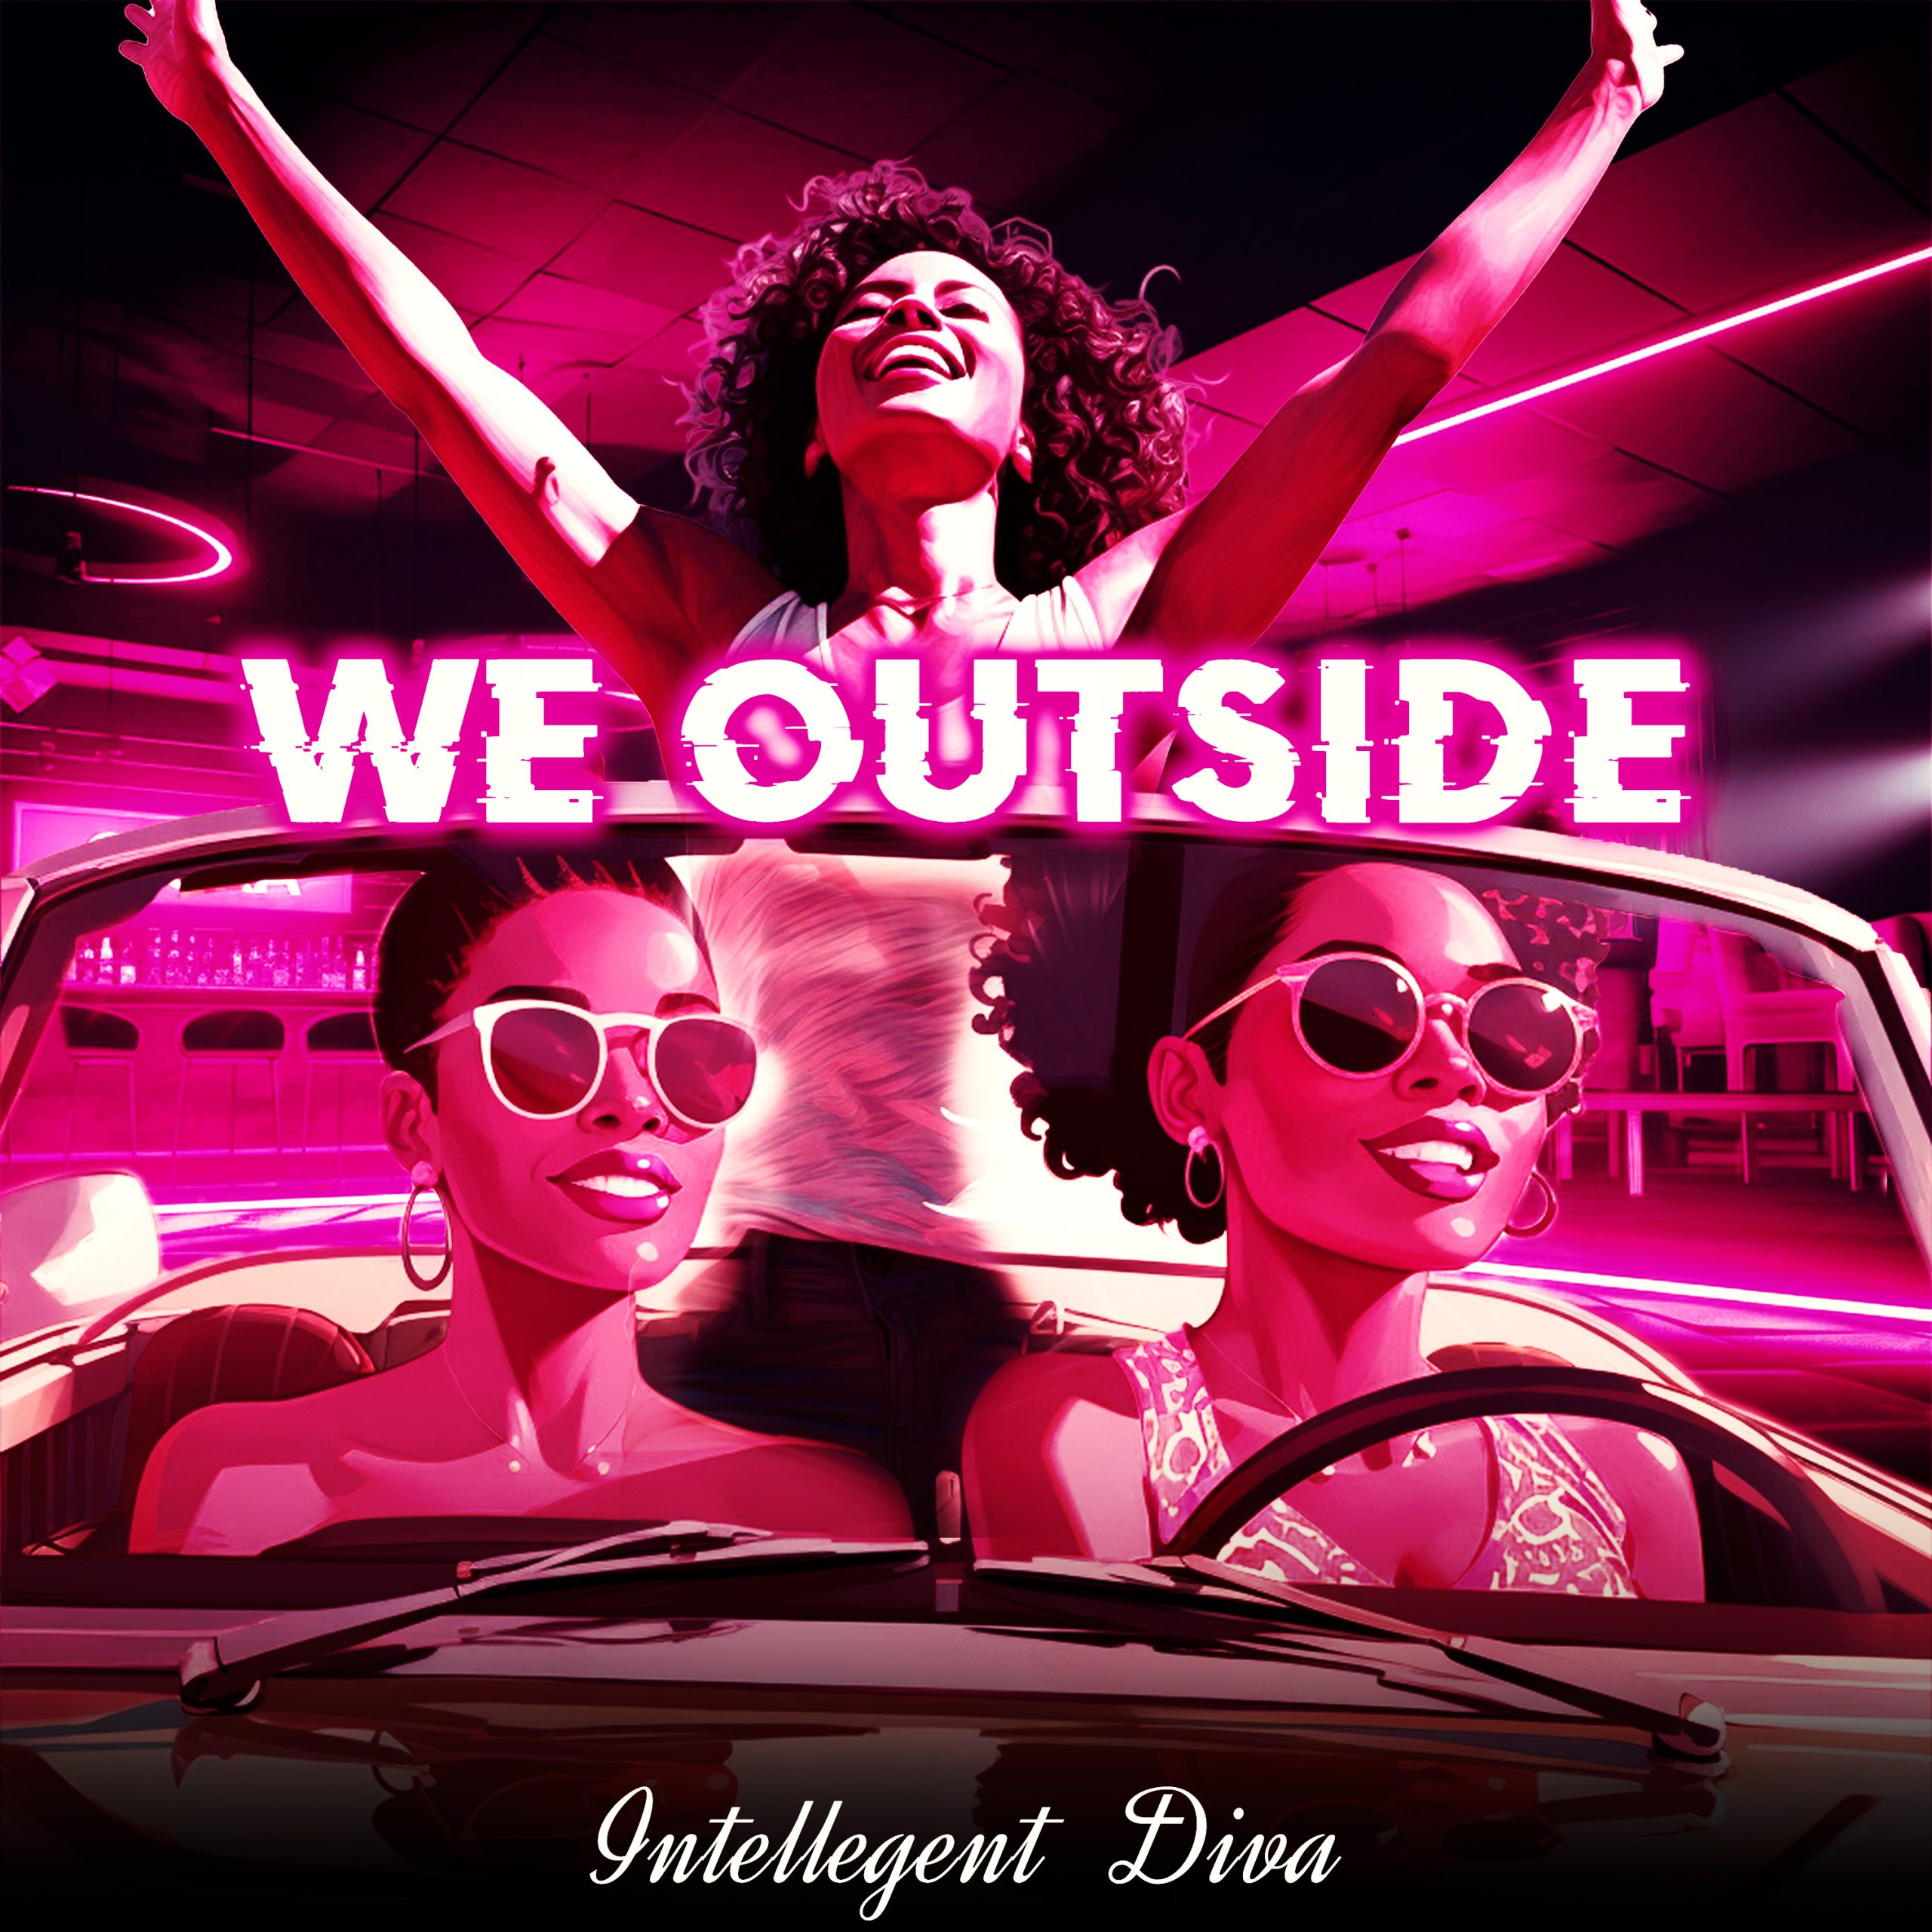 Combining pop, house, and electronic dance: ‘Intelligent Diva’ excites fans with a new genre and single ‘We Outside’.